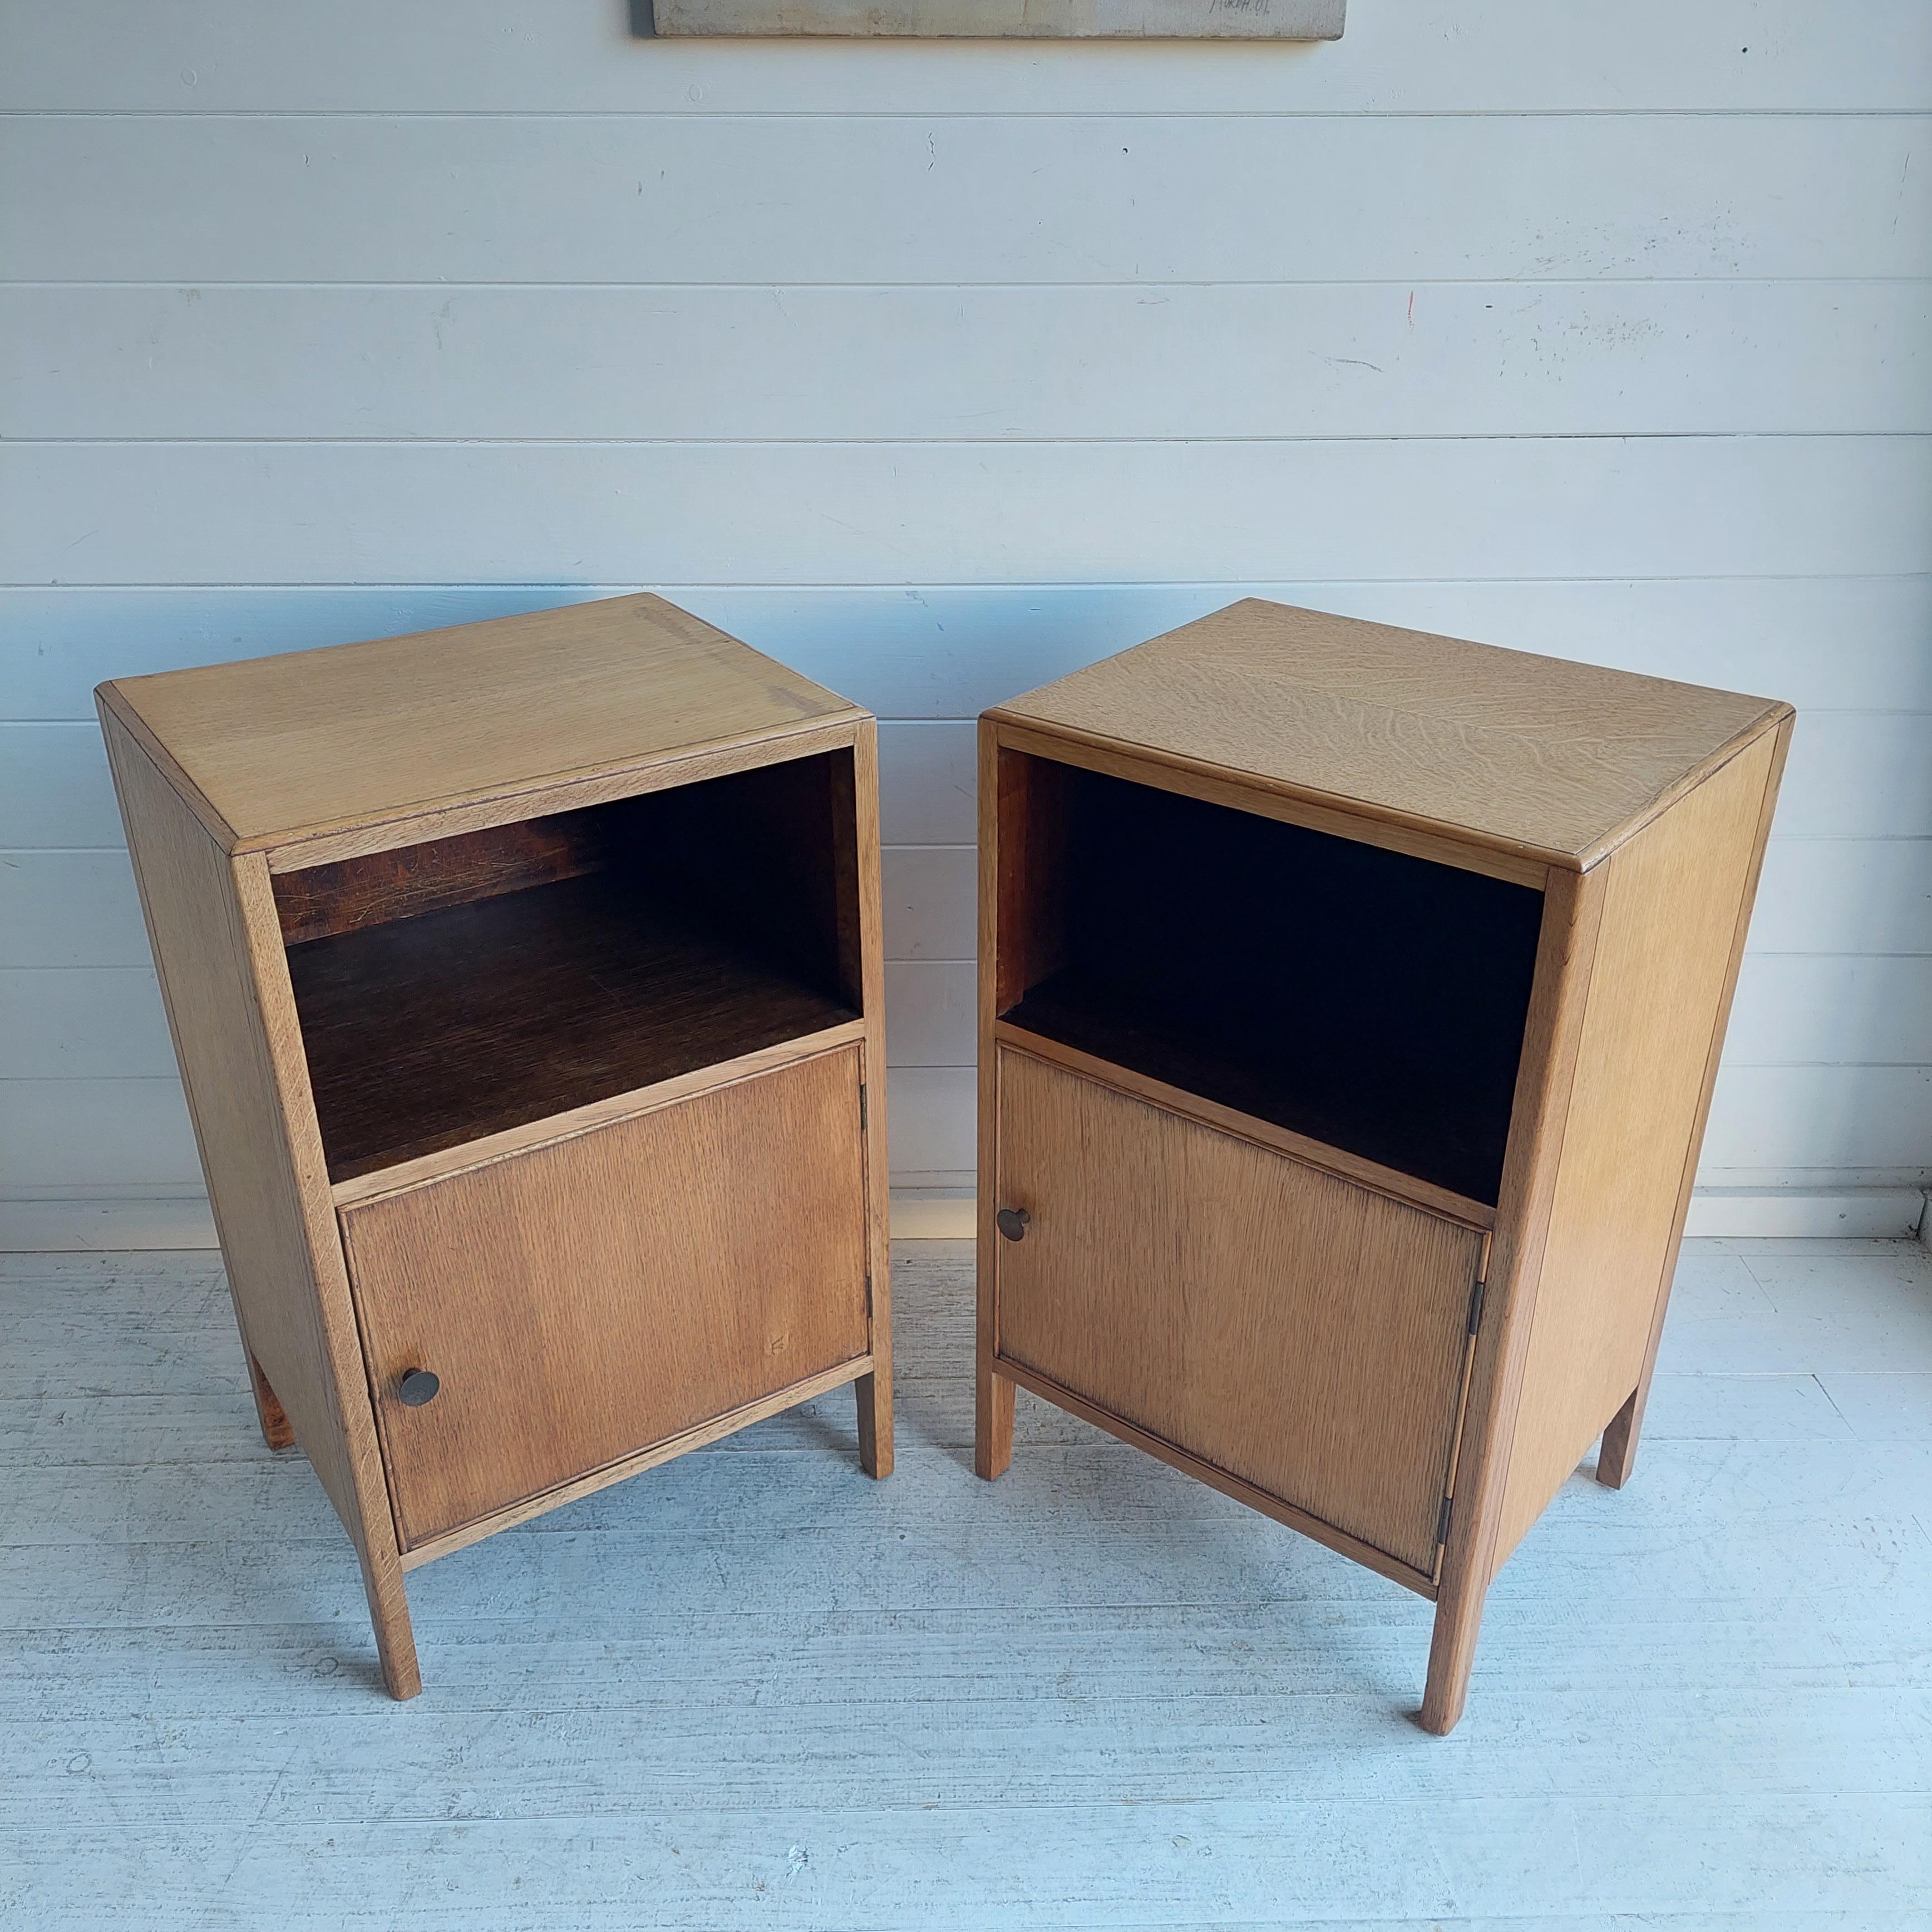 A pair of stylish vintage bedside cabinets.
British Modern Design - A pair of mid 20th century circa 1940/50s post-war Utility furniture.
In the style Heal & Sons post war utility design.
Gorgeous  oak Chest nightstands from the utility furniture